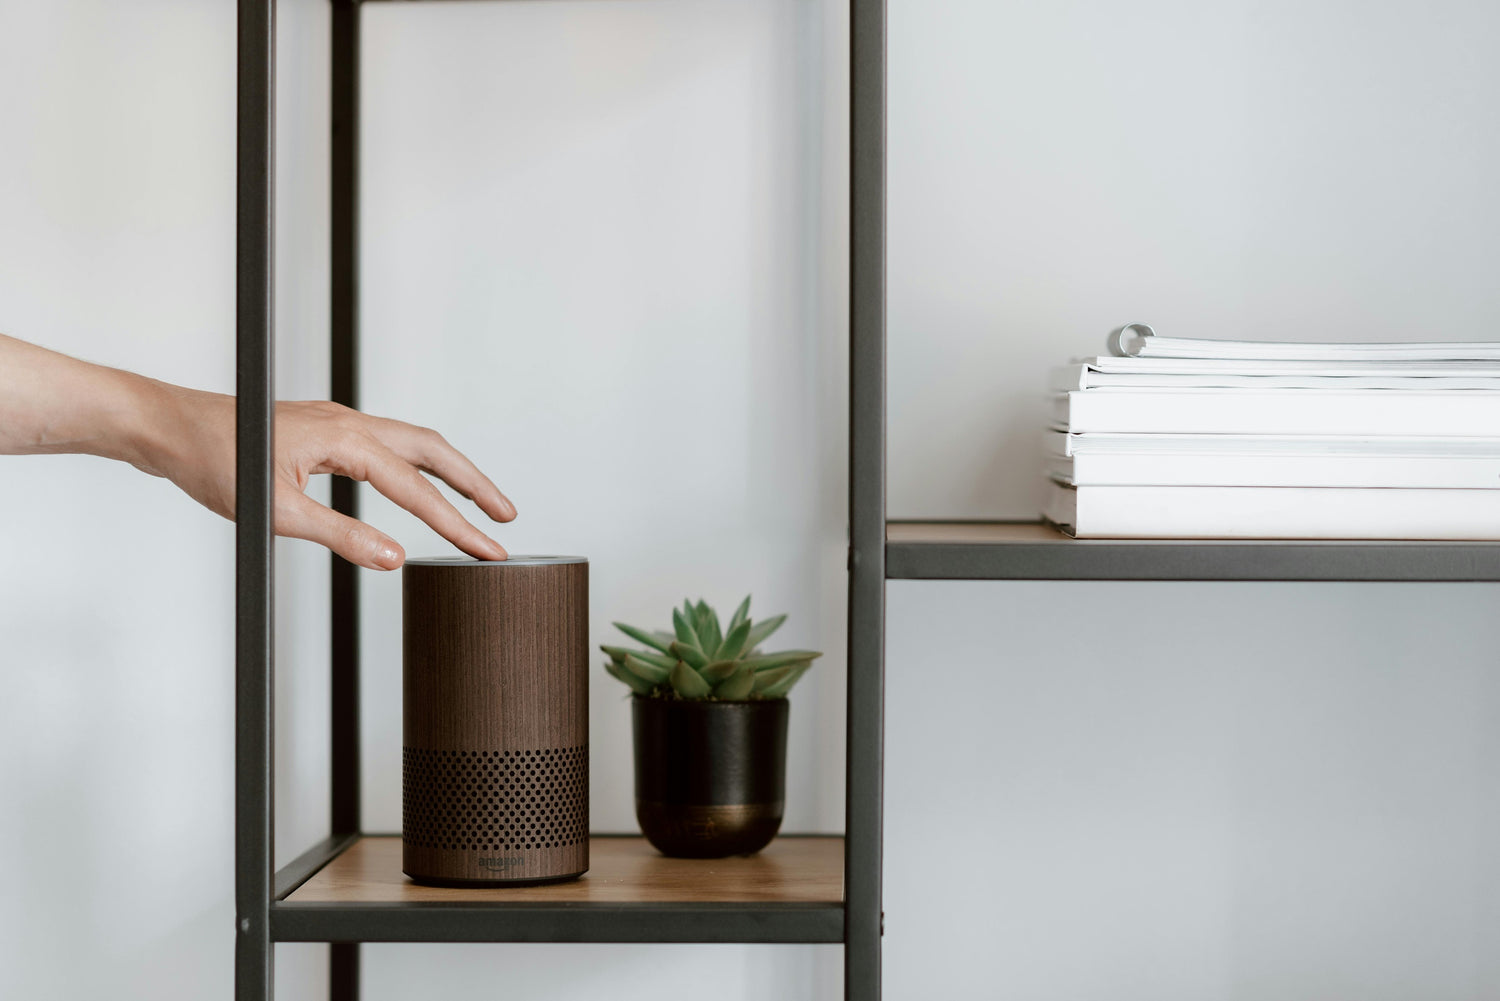 How to incorporate smart speakers into home decor? - House Boost Center